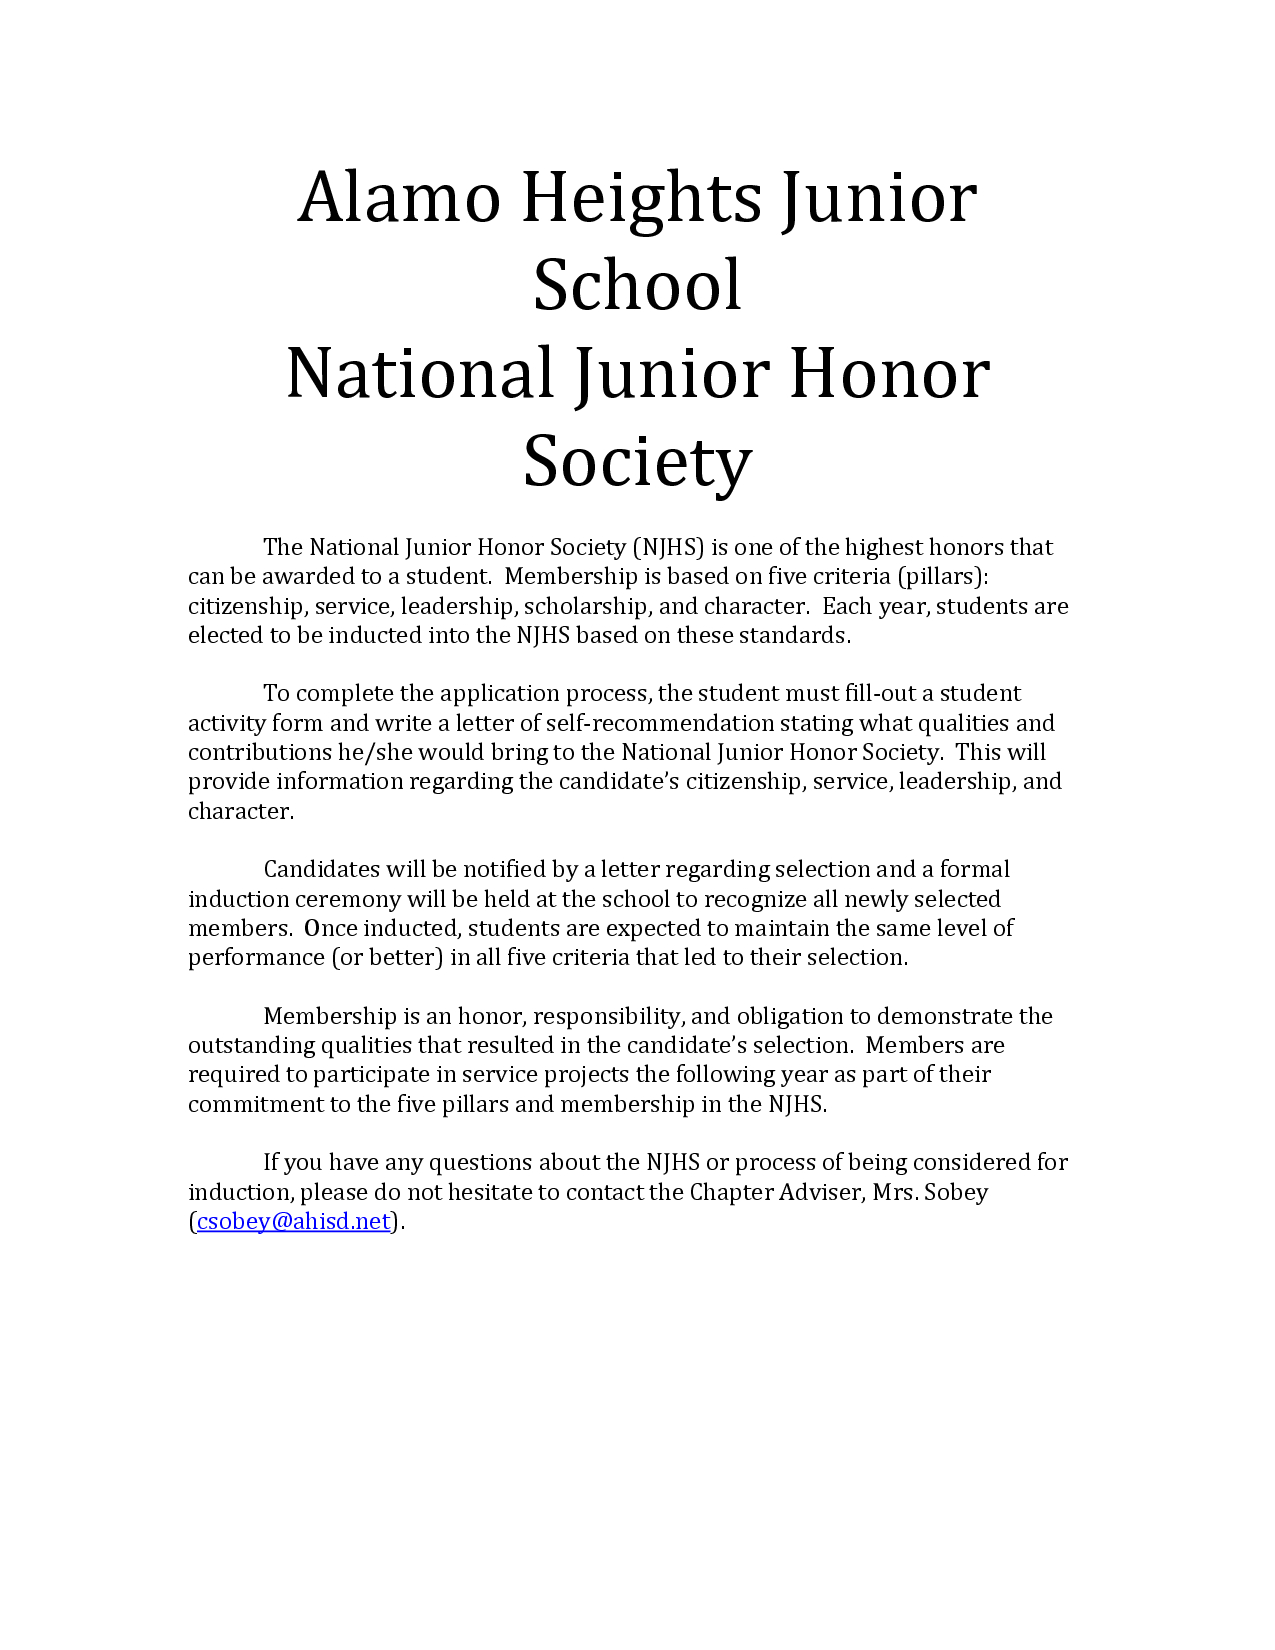 Recommendation Letter For National Honor Society Debandje intended for measurements 1275 X 1650